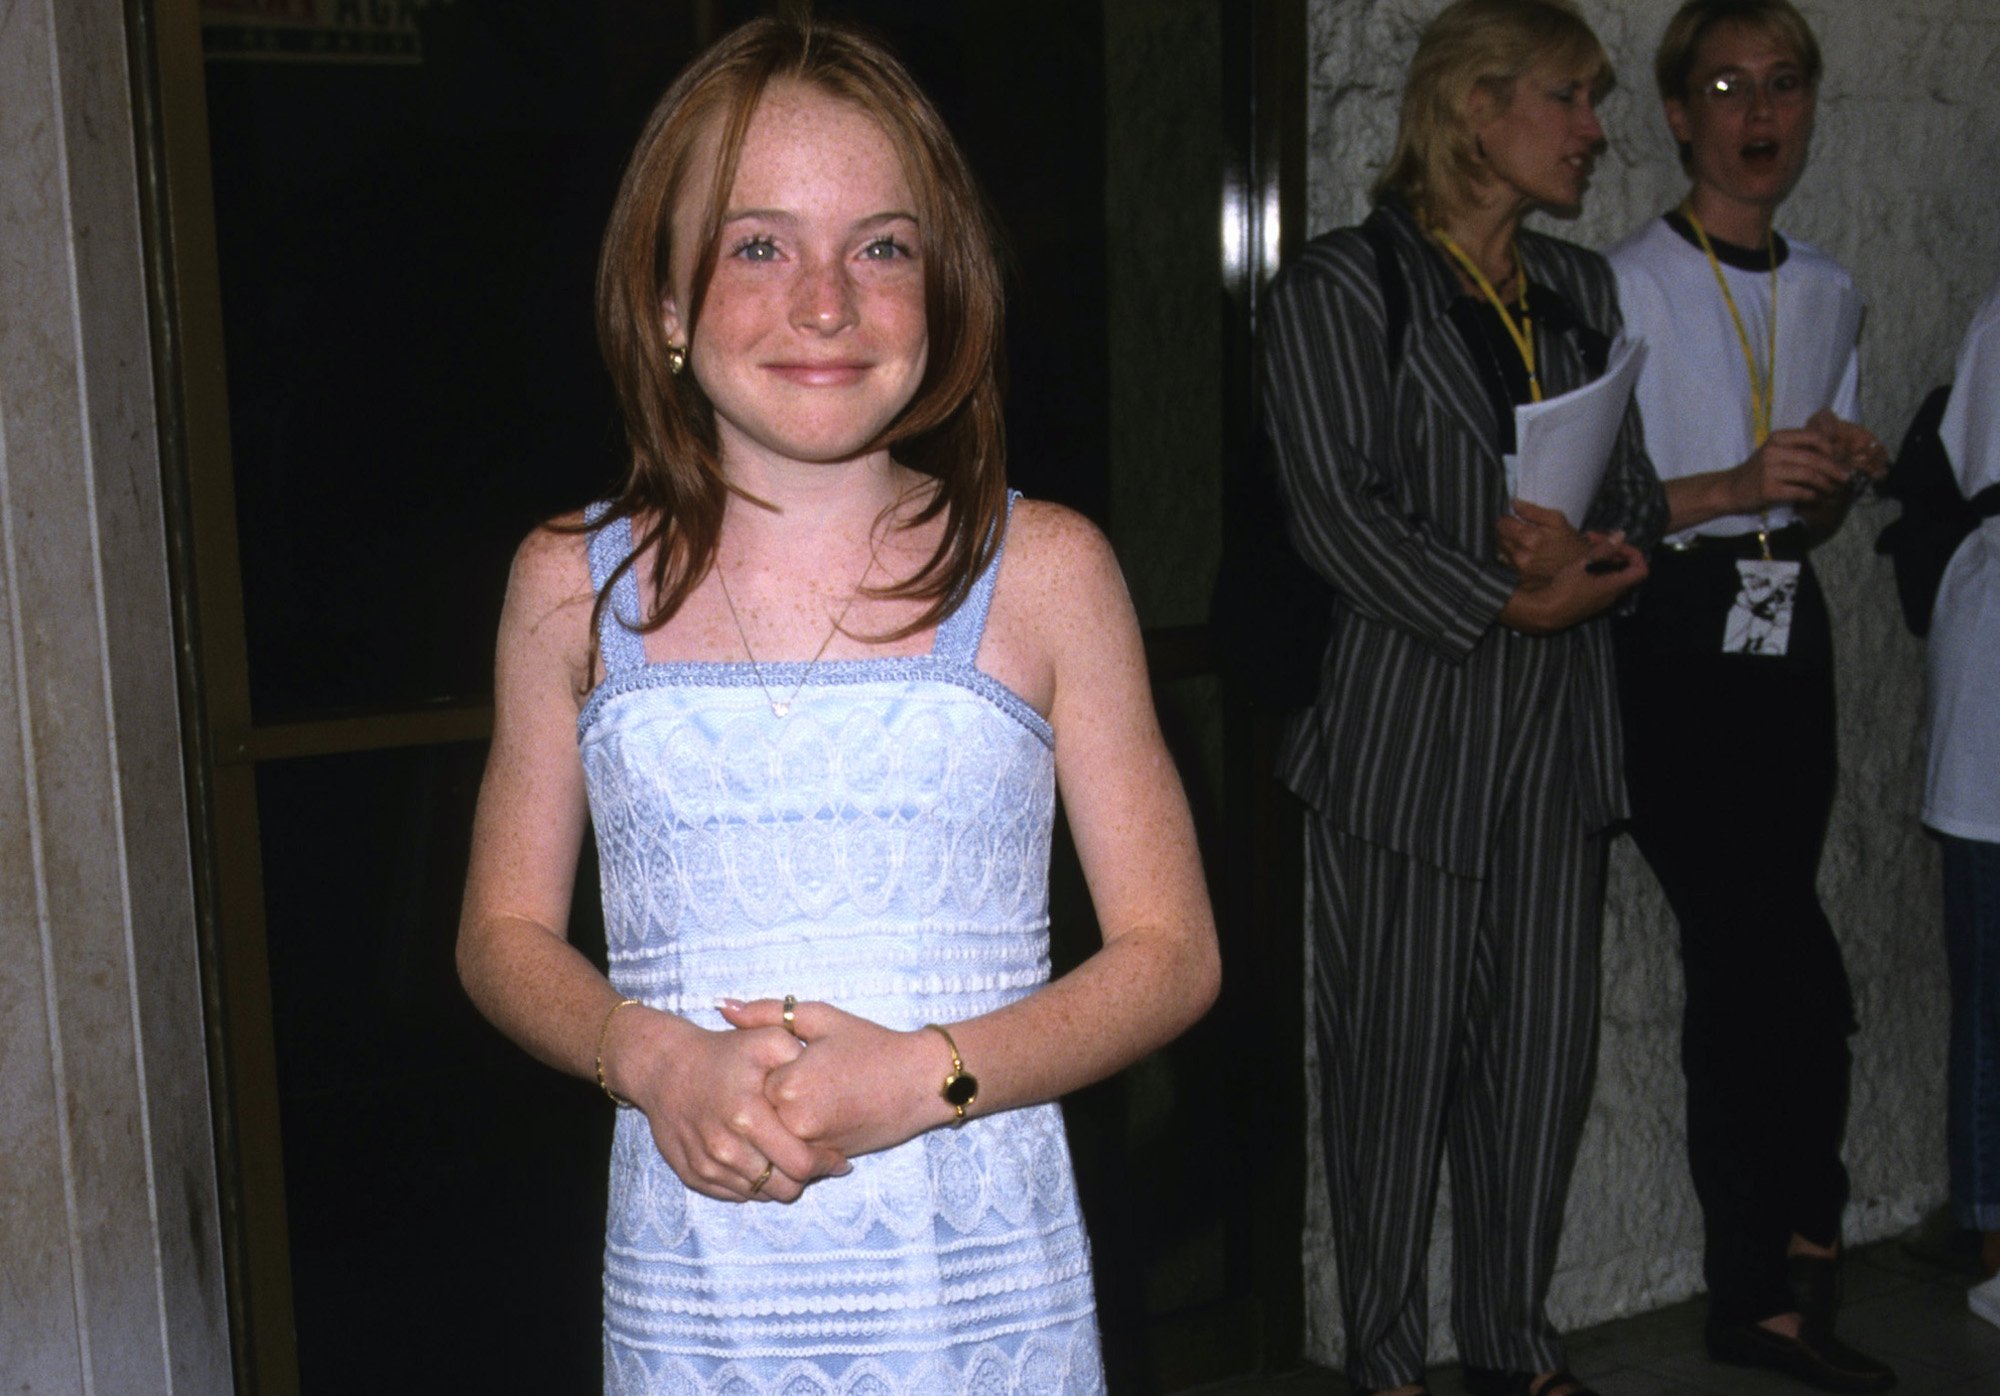 Lindsay Lohan smiles on the red carpet as she attends premiere of 'The Parent Trap'